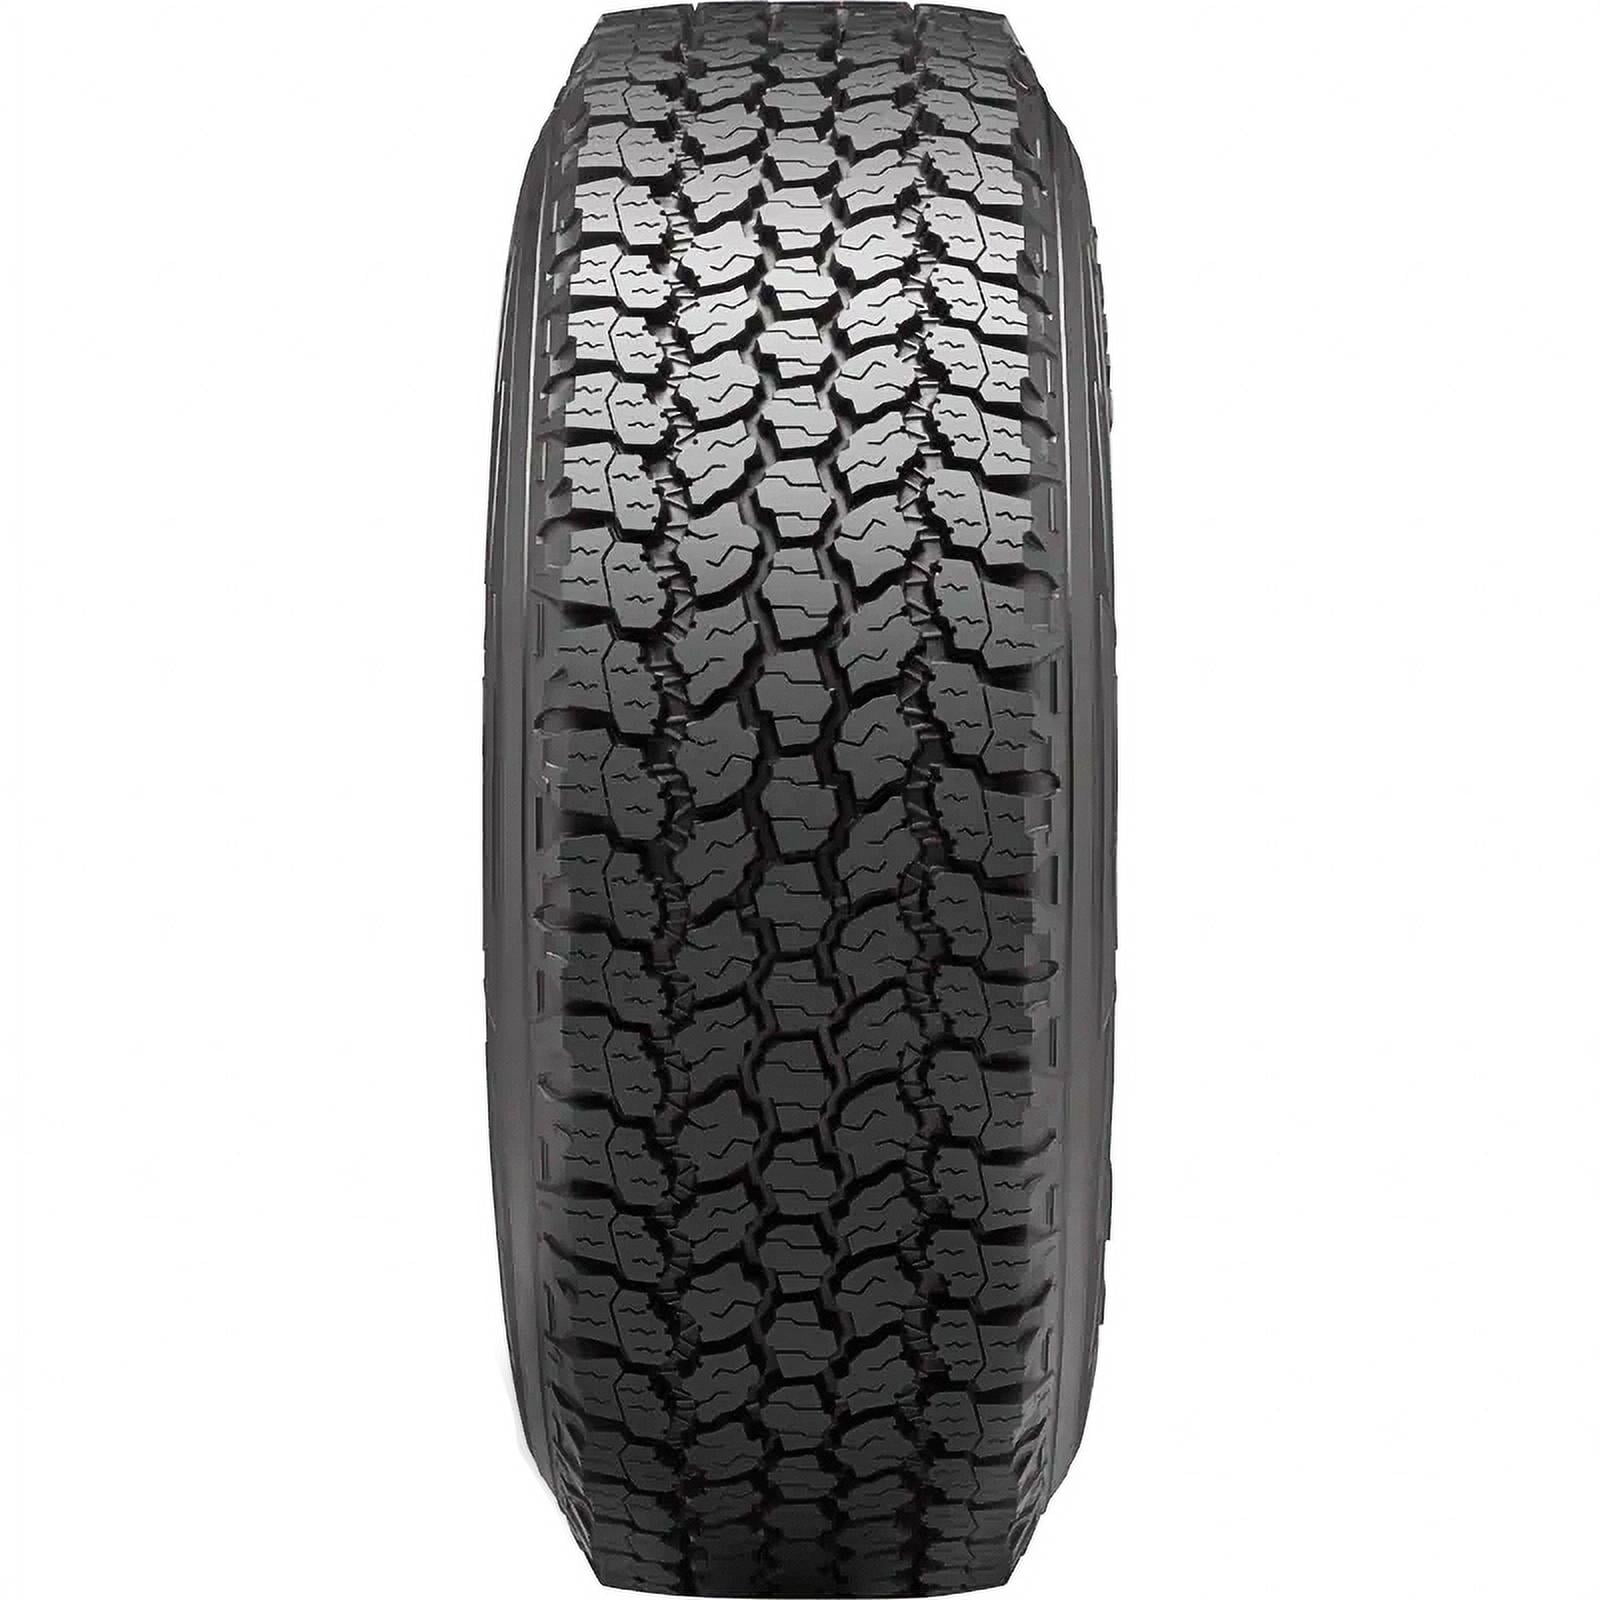 Buy Goodyear Wrangler All-Terrain Adventure with Kevlar 265/75R16 116 T  Tire Online at Lowest Price in Ubuy Austria. 43085915